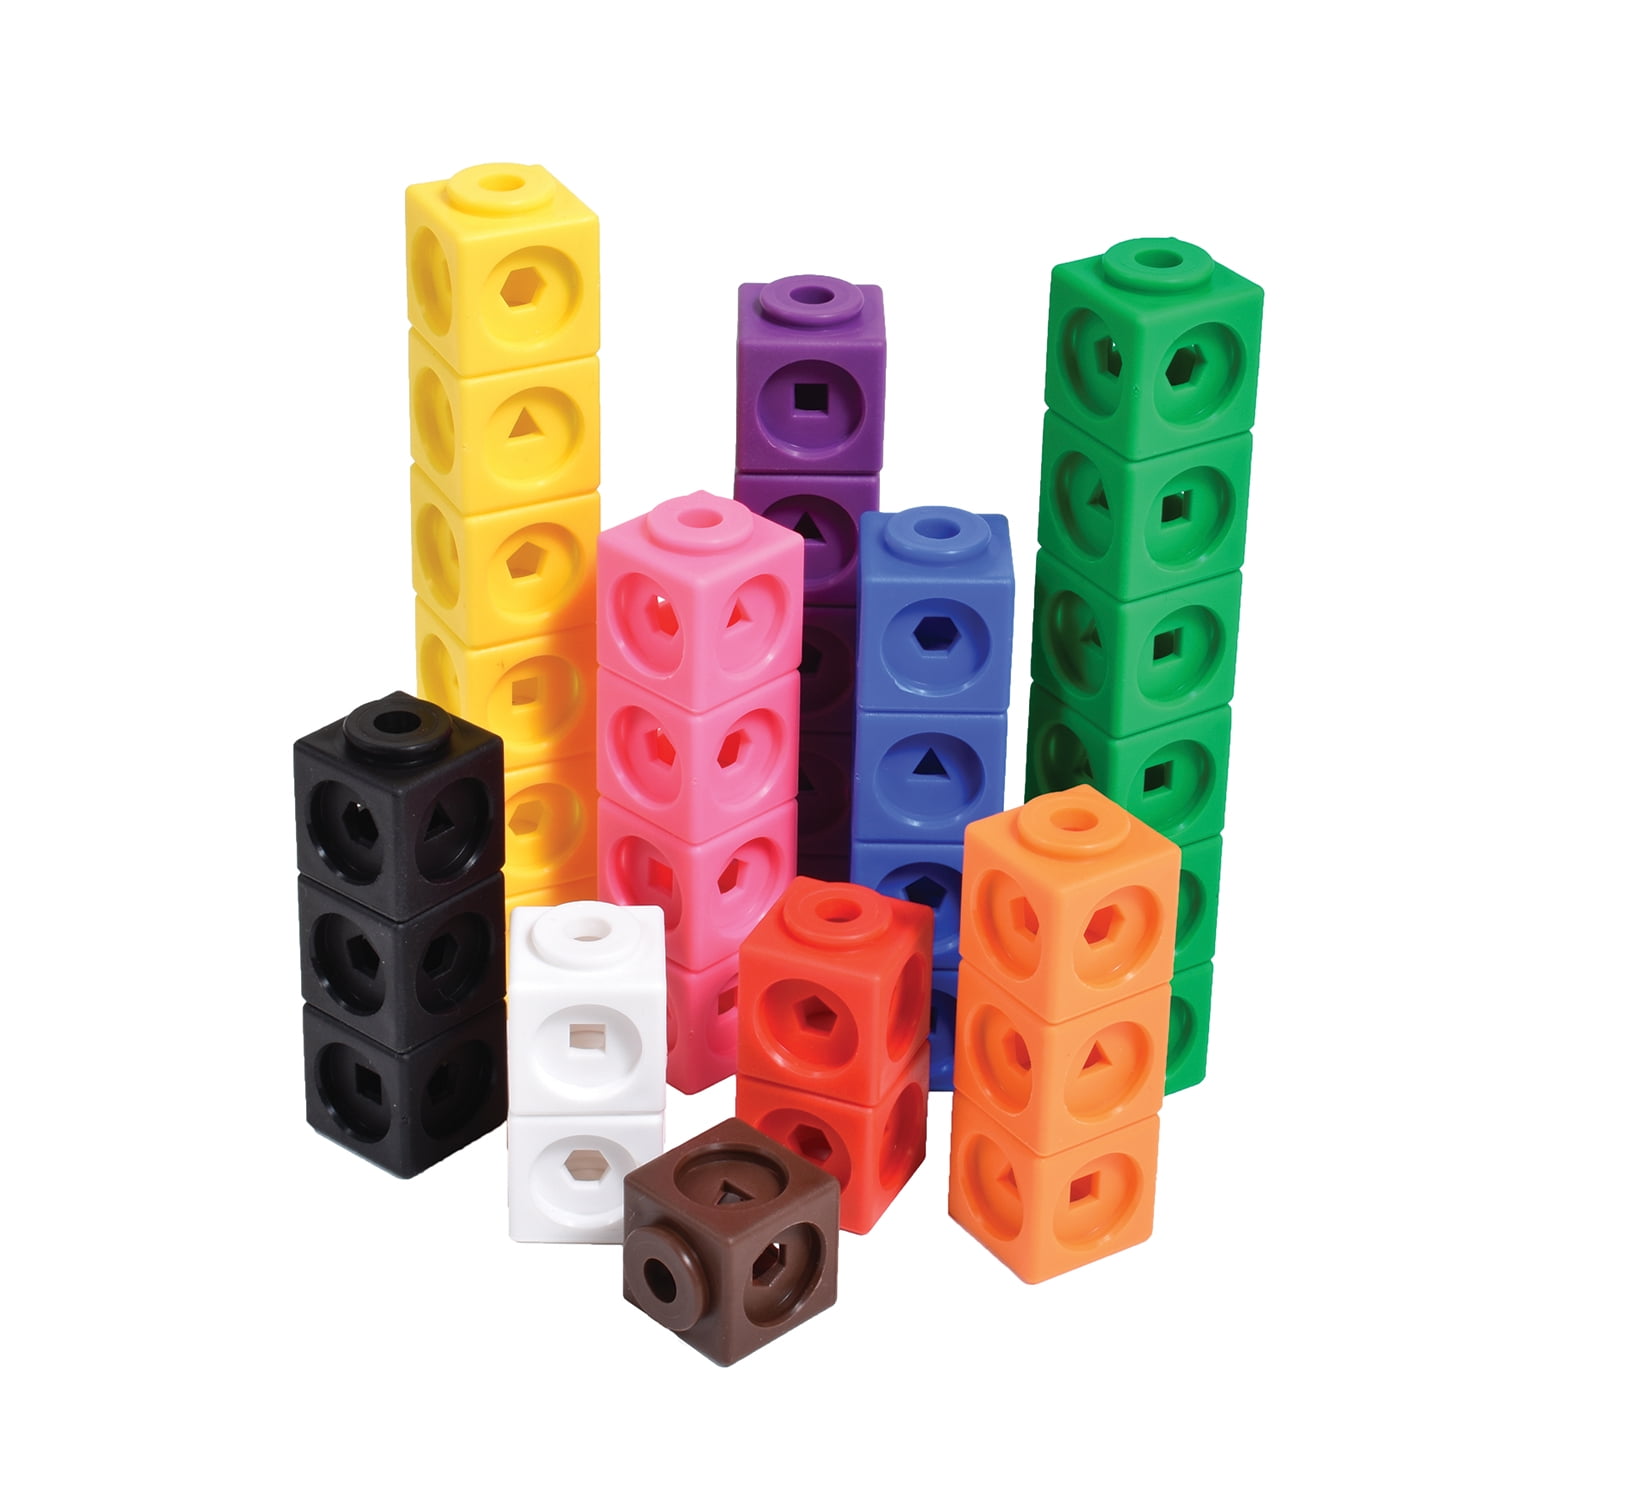 Set of 100 Snap Cubes Build Learning Resource School Educational Counting Toy 